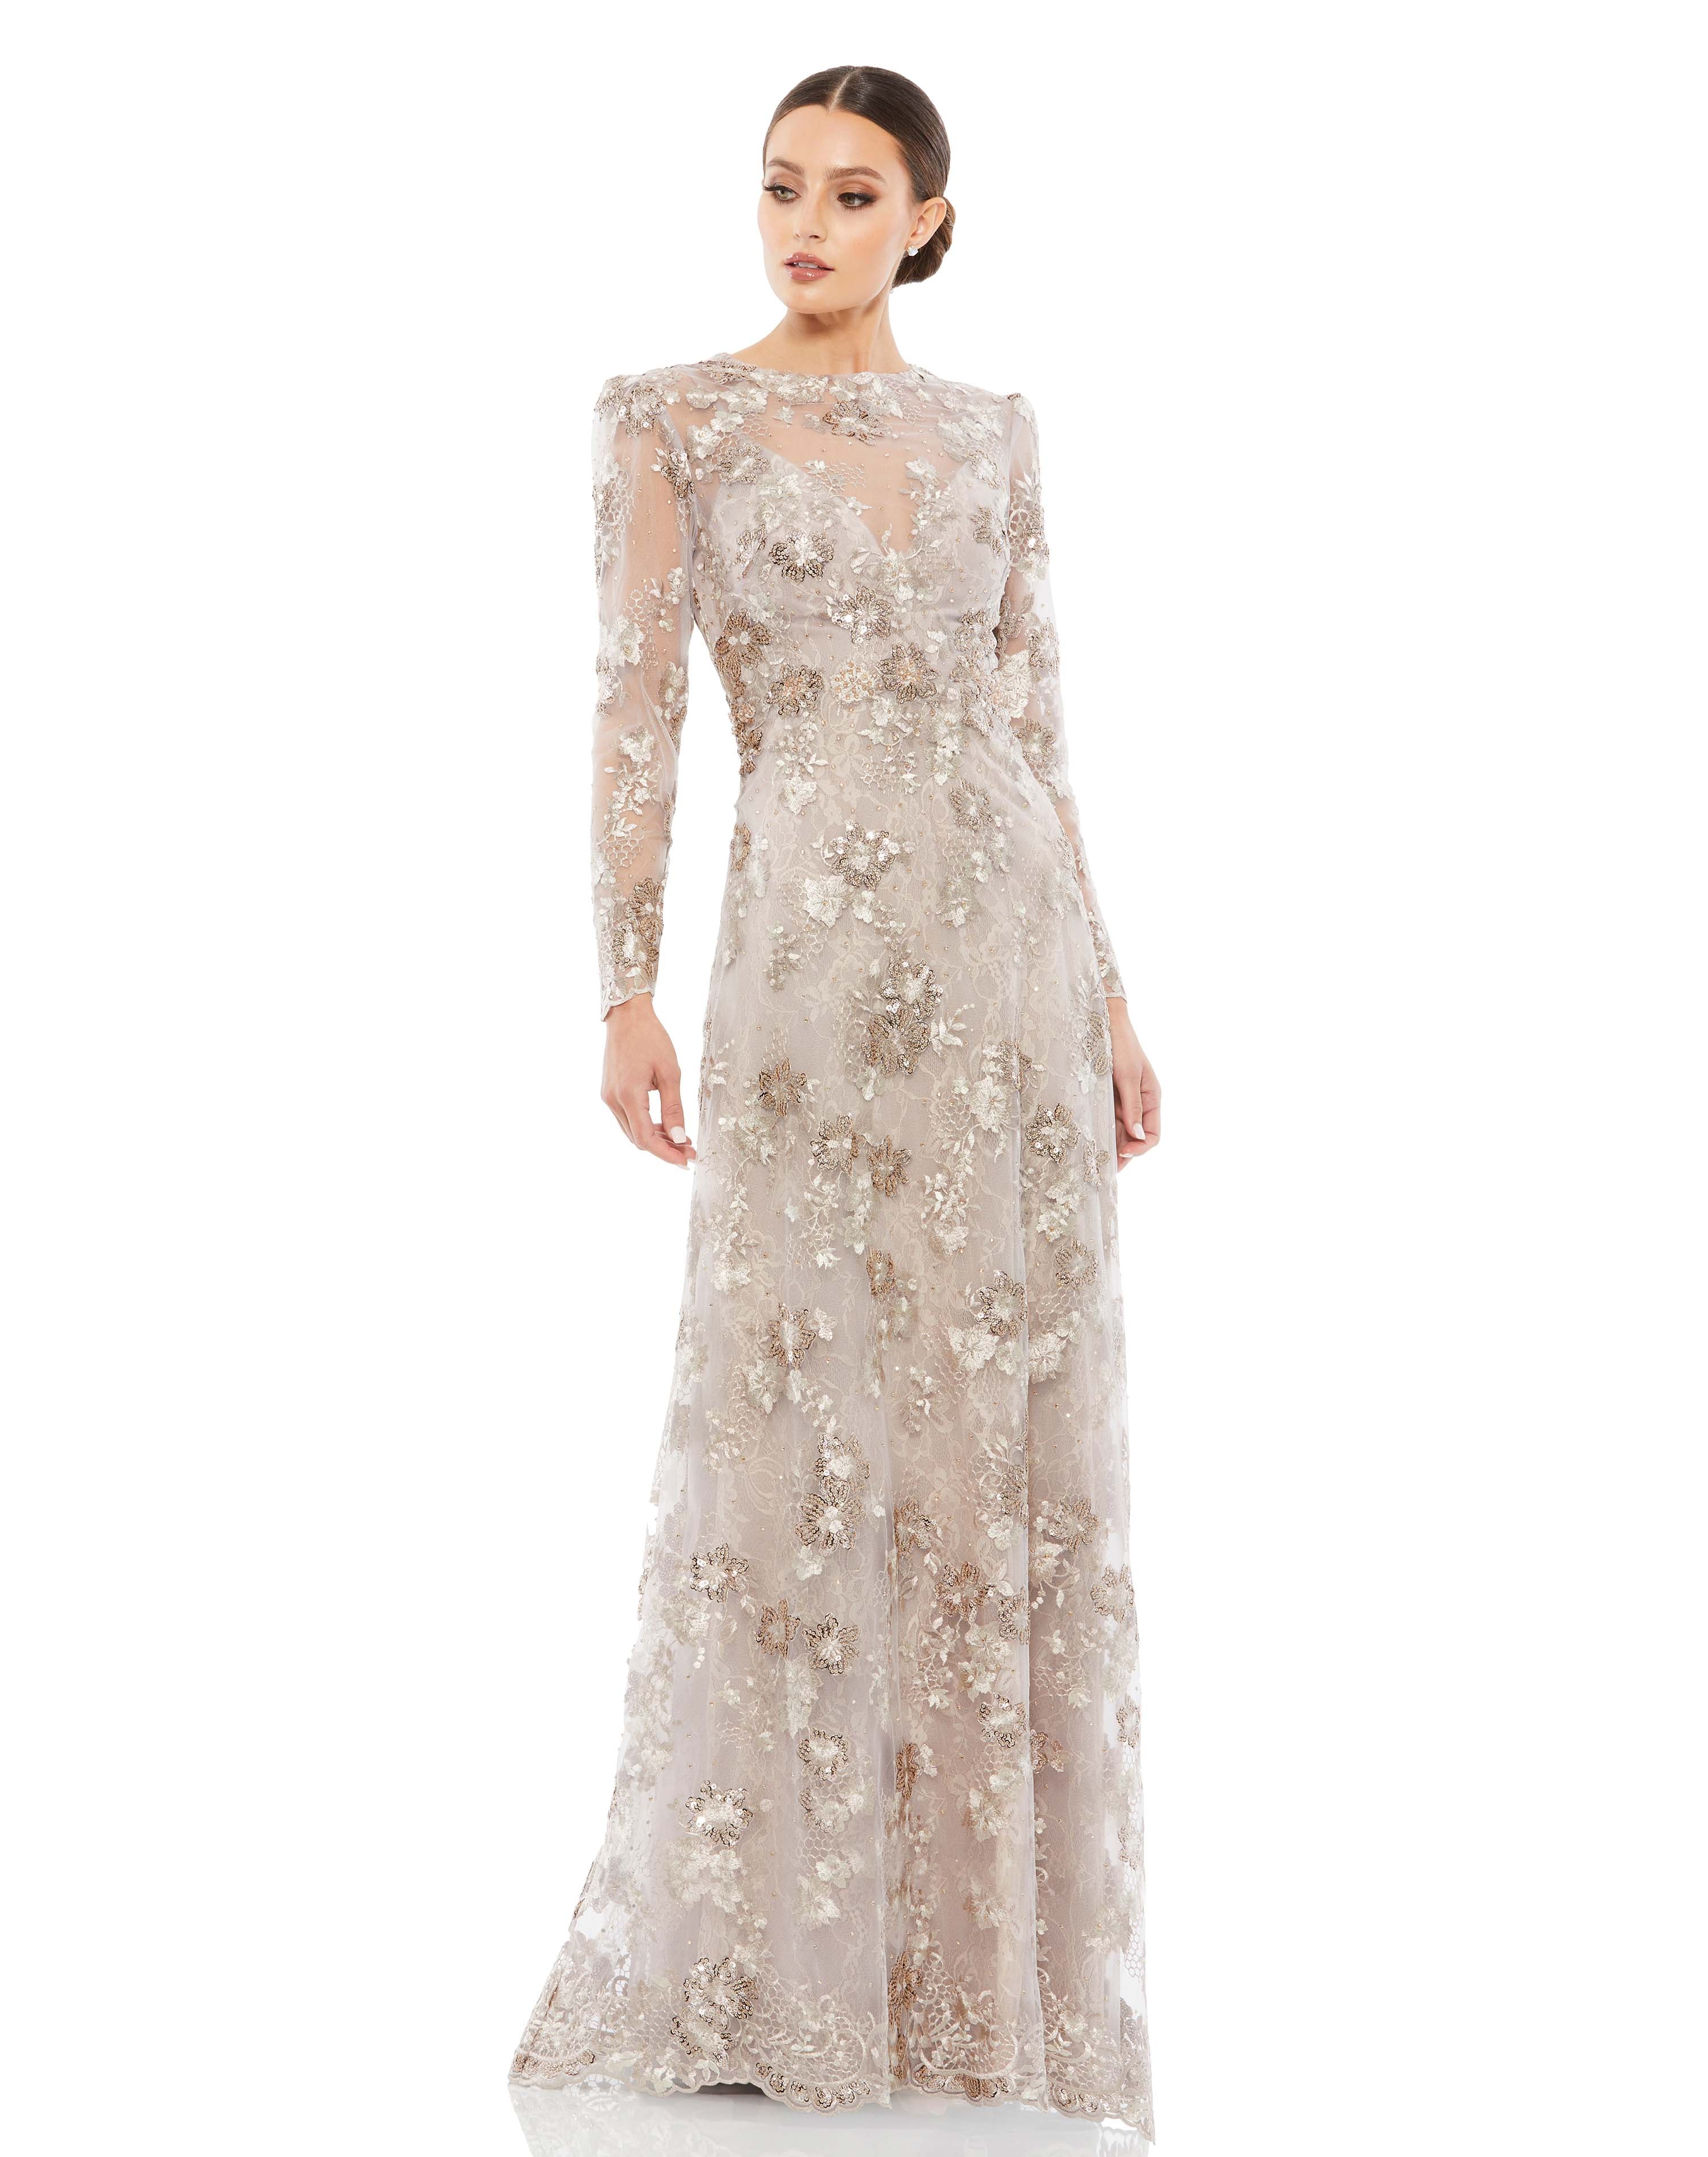 Floral Embroidered Illusion Long Sleeve Evening Gown